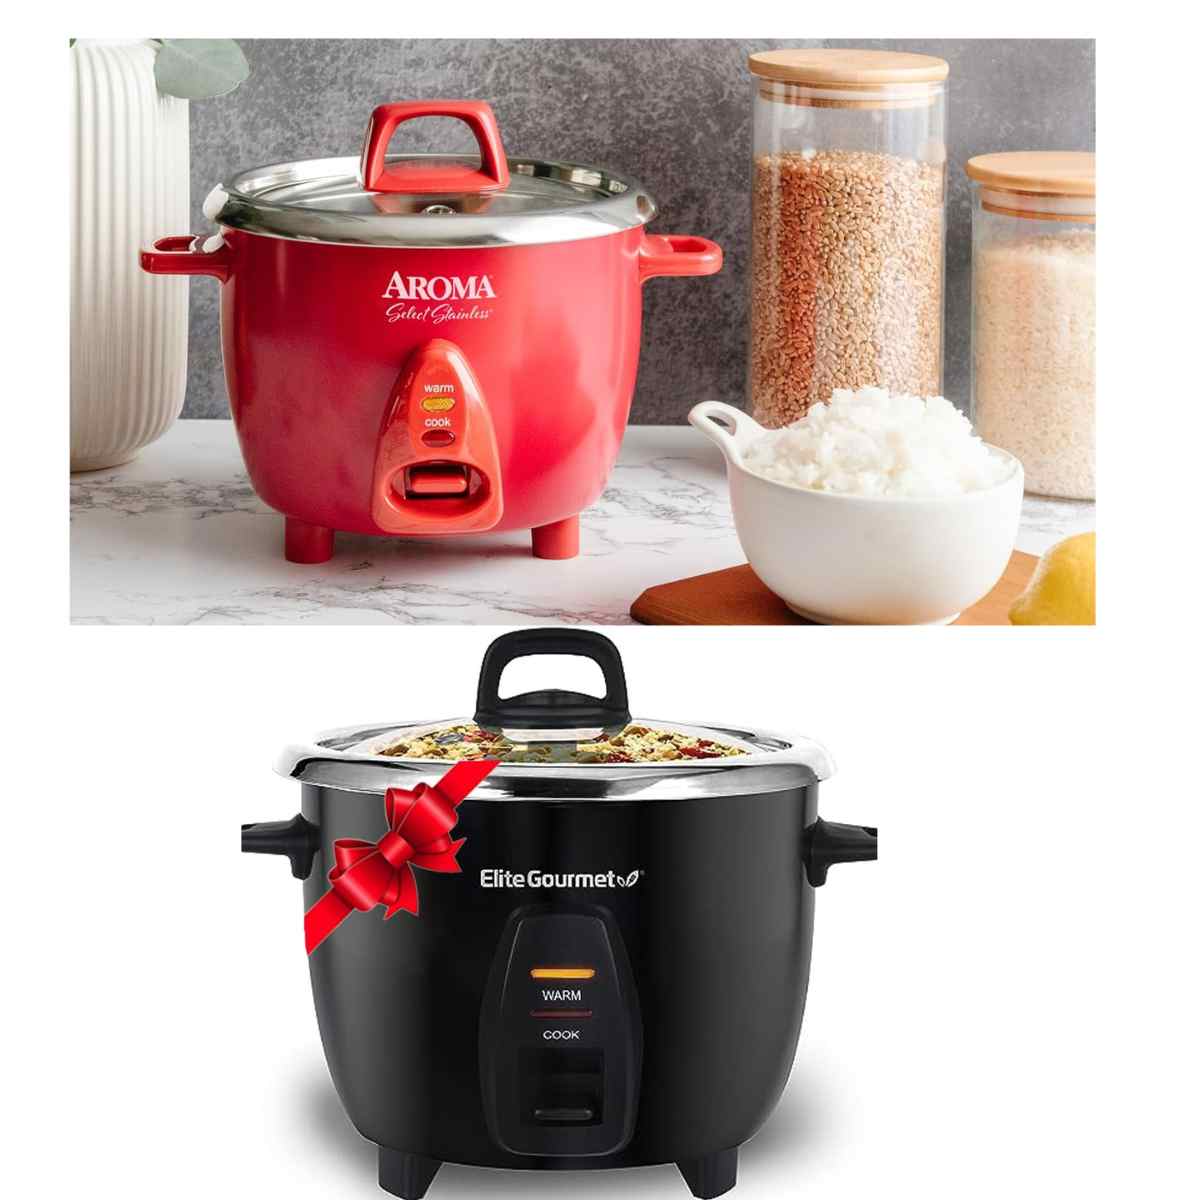 Stainless steel Rice cookers from Aroma & Elite Gourmet start at $27+